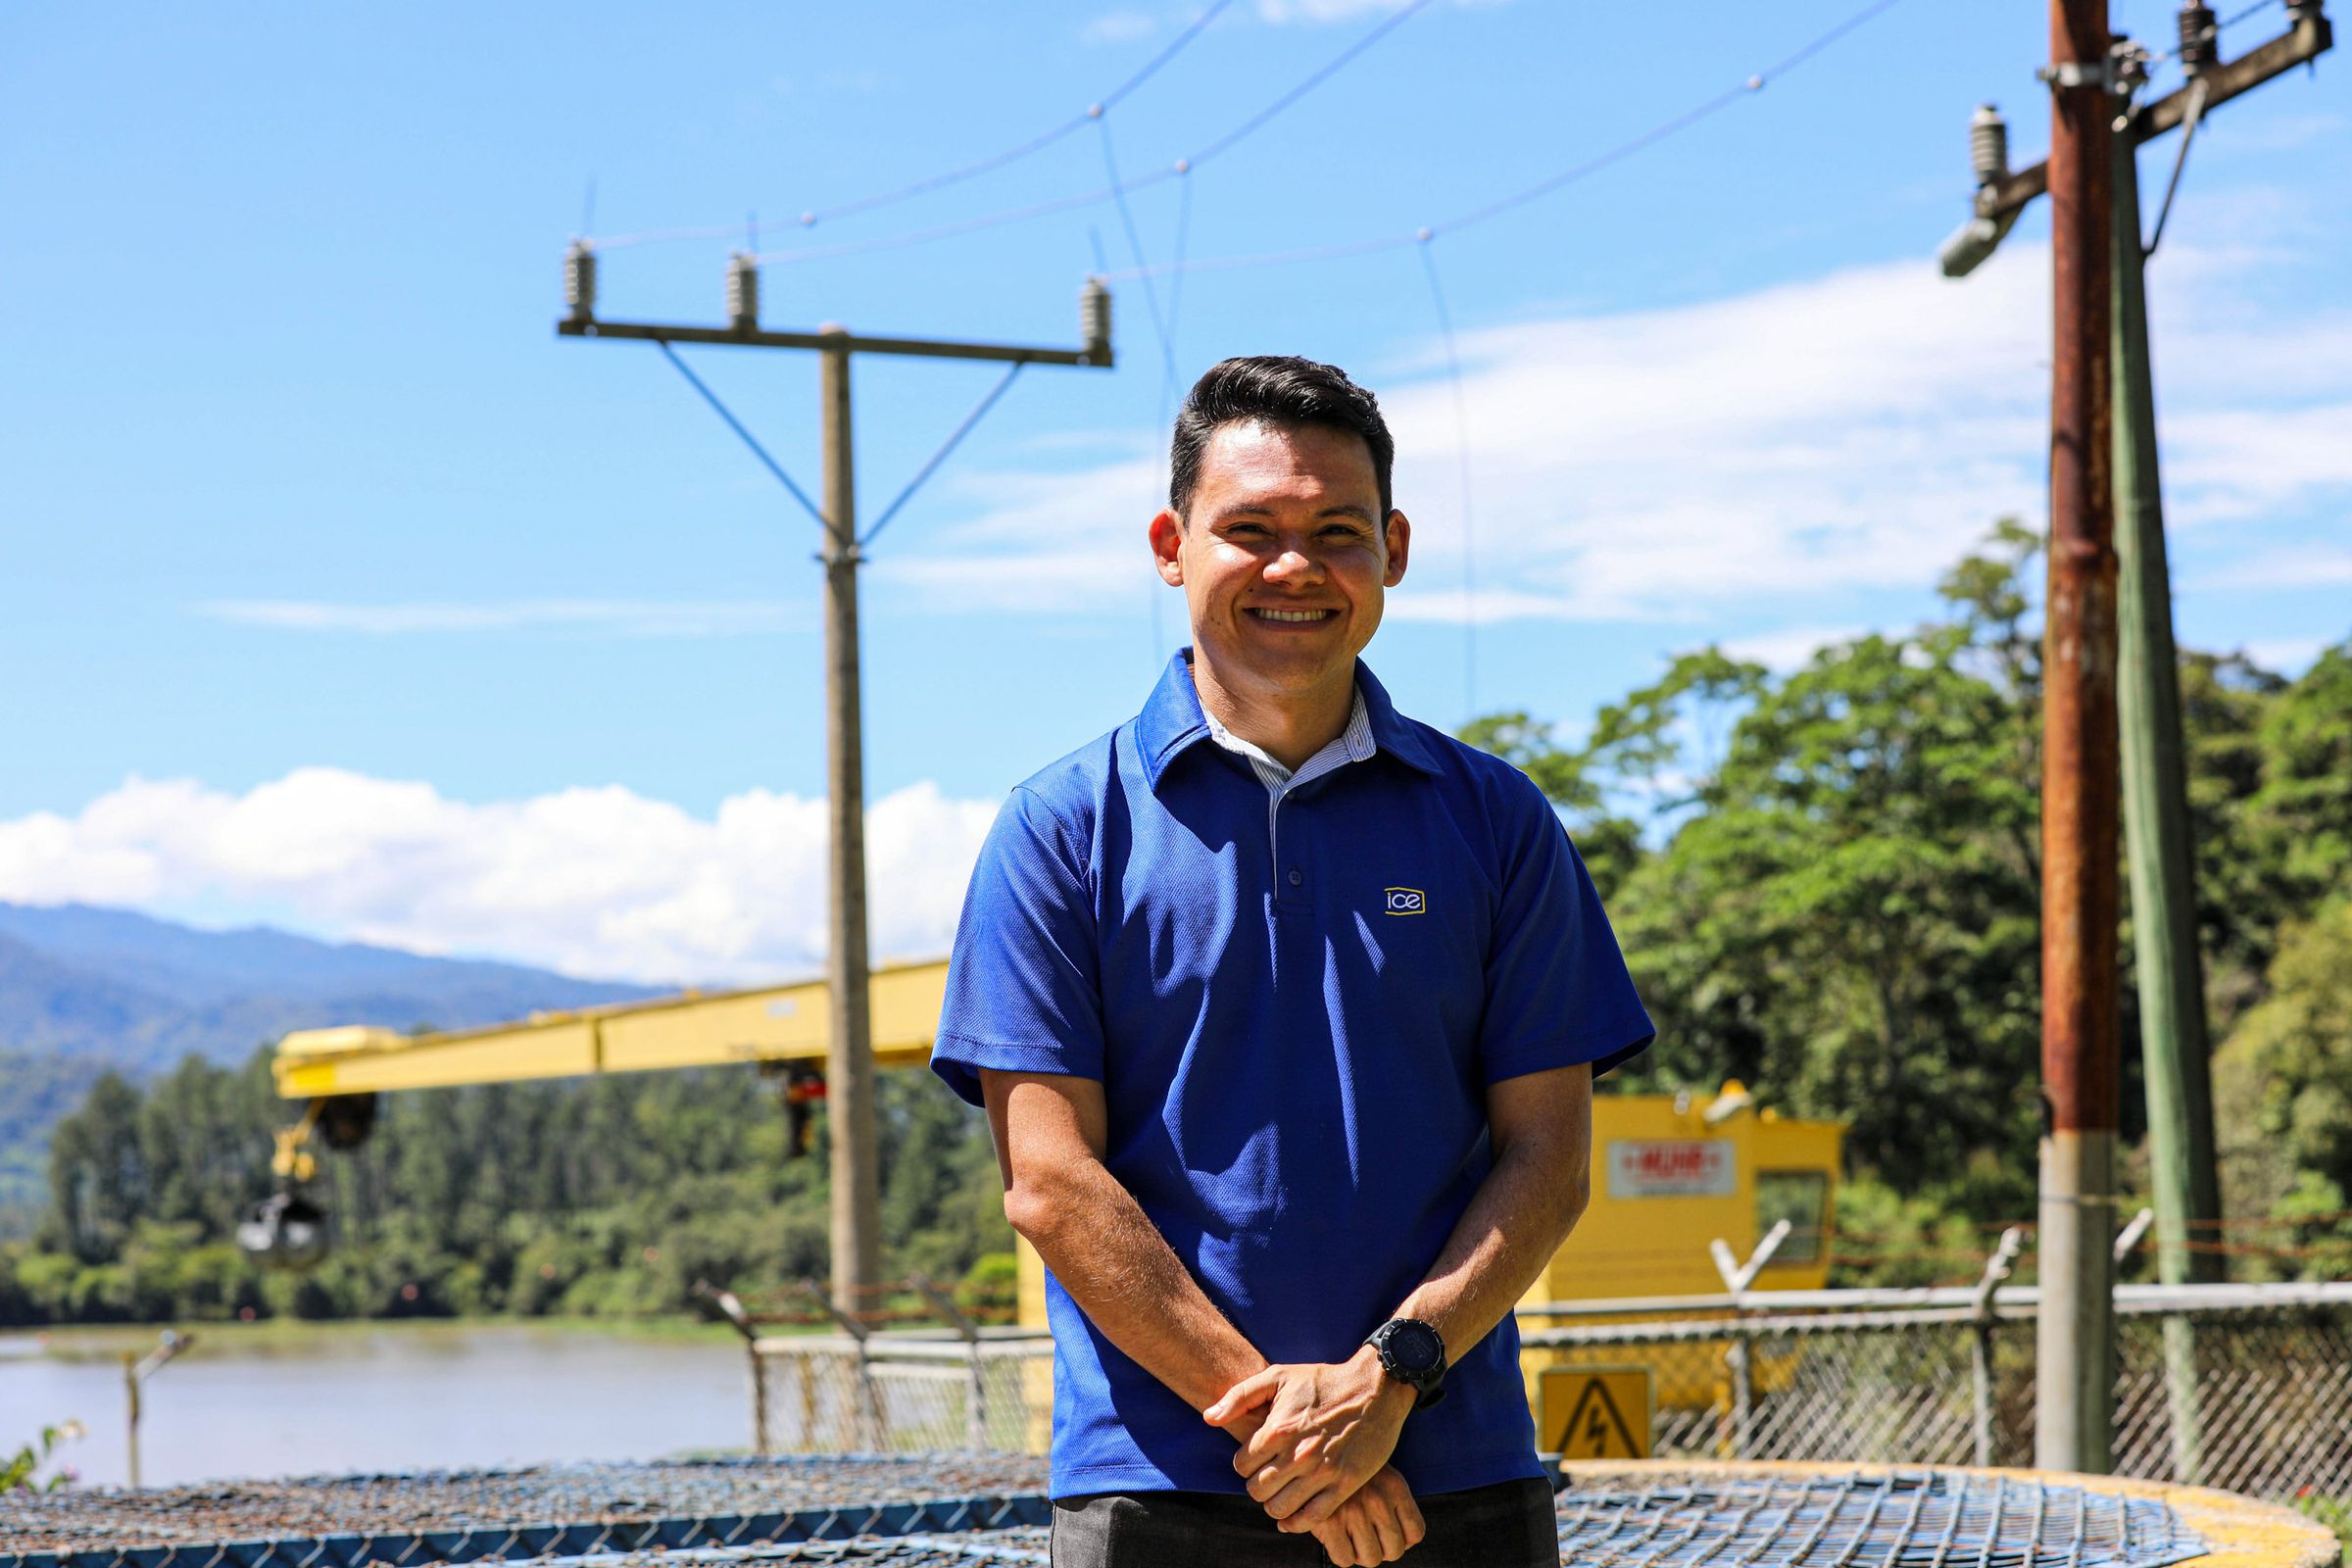 A smiling man stands in front of electric power lines.